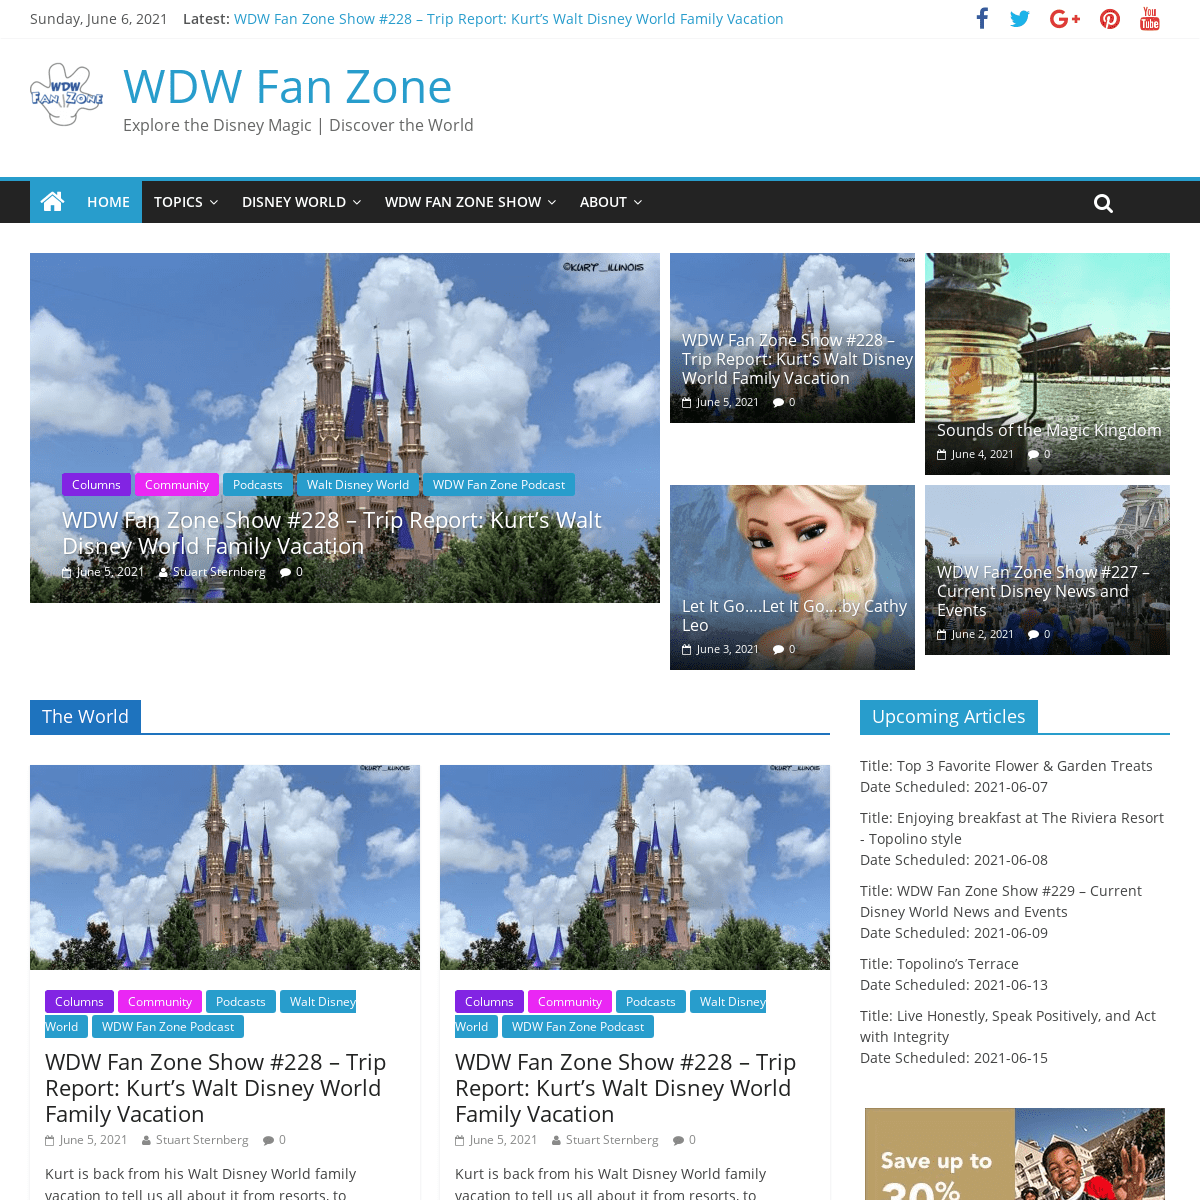 A complete backup of https://wdwfanzone.com